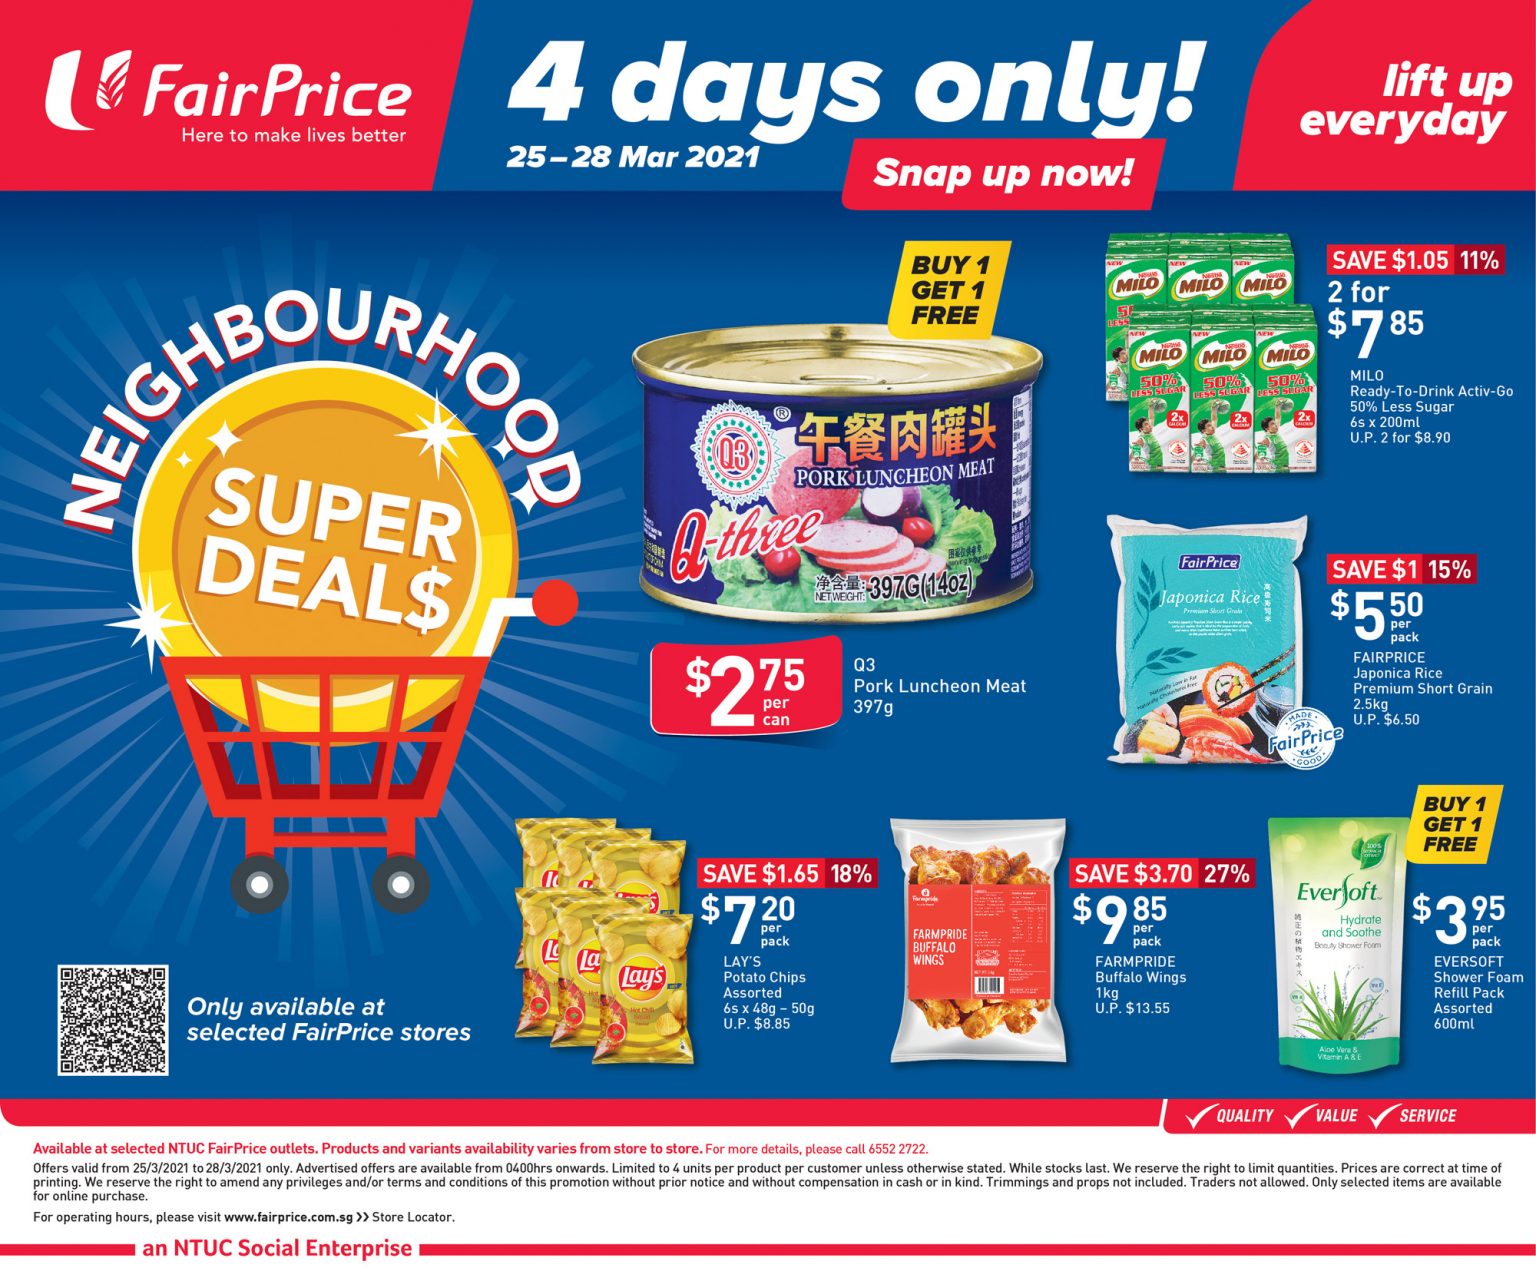 FairPrice 4-day only deals till 28 March 2021